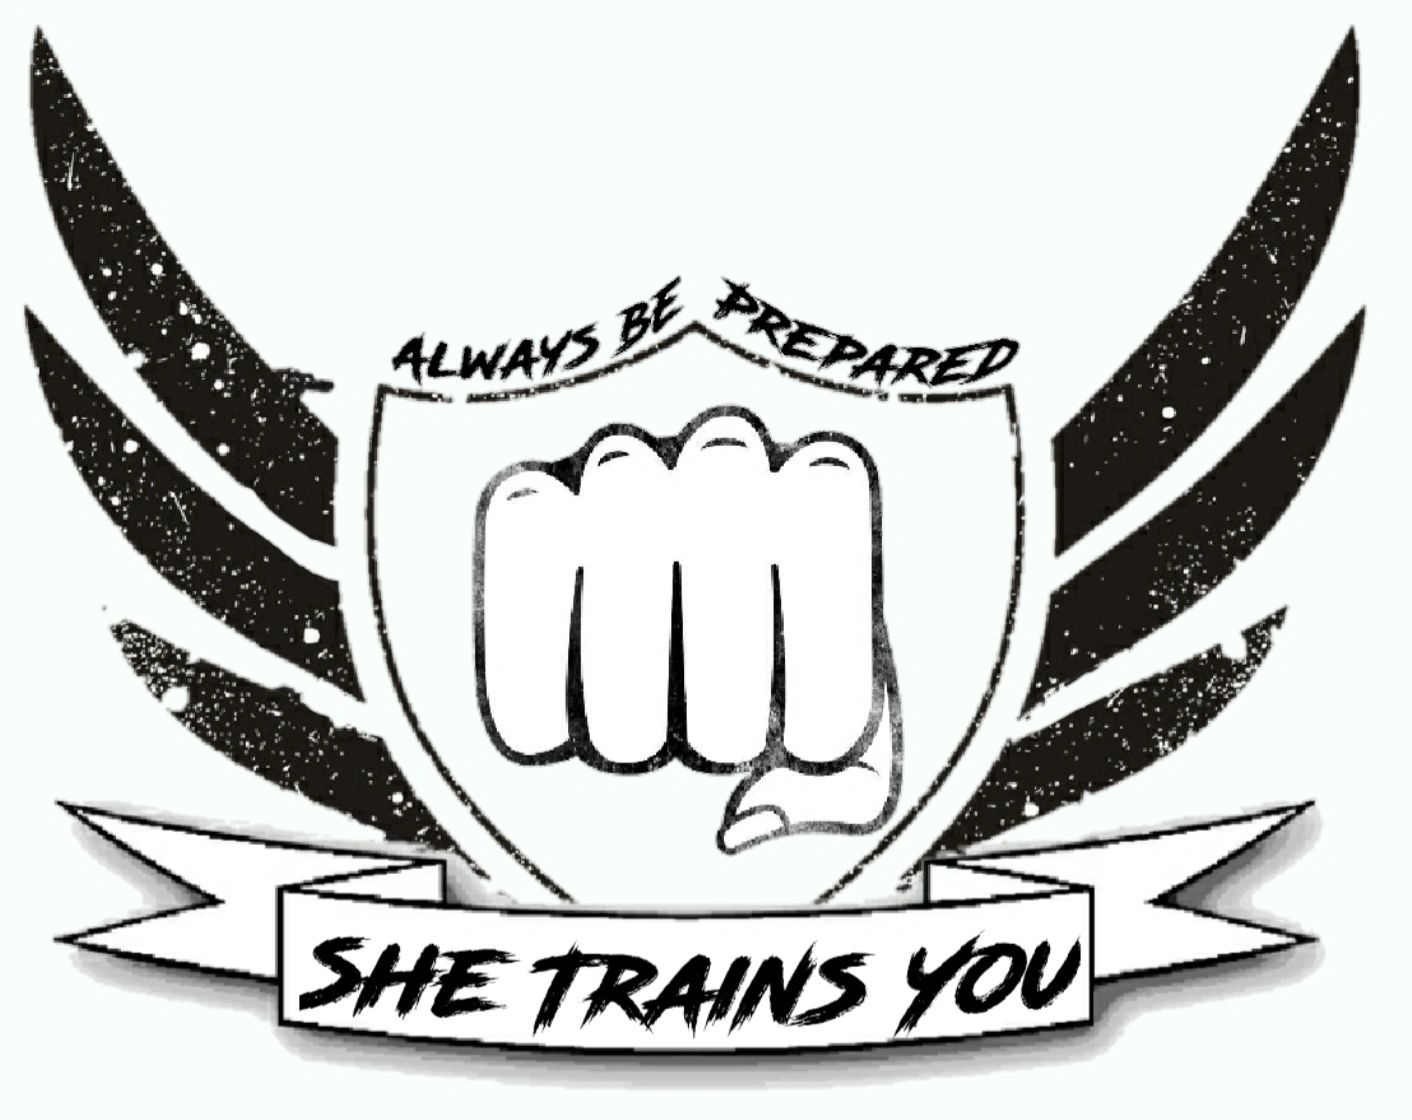 She Trains You logo is trademarked.